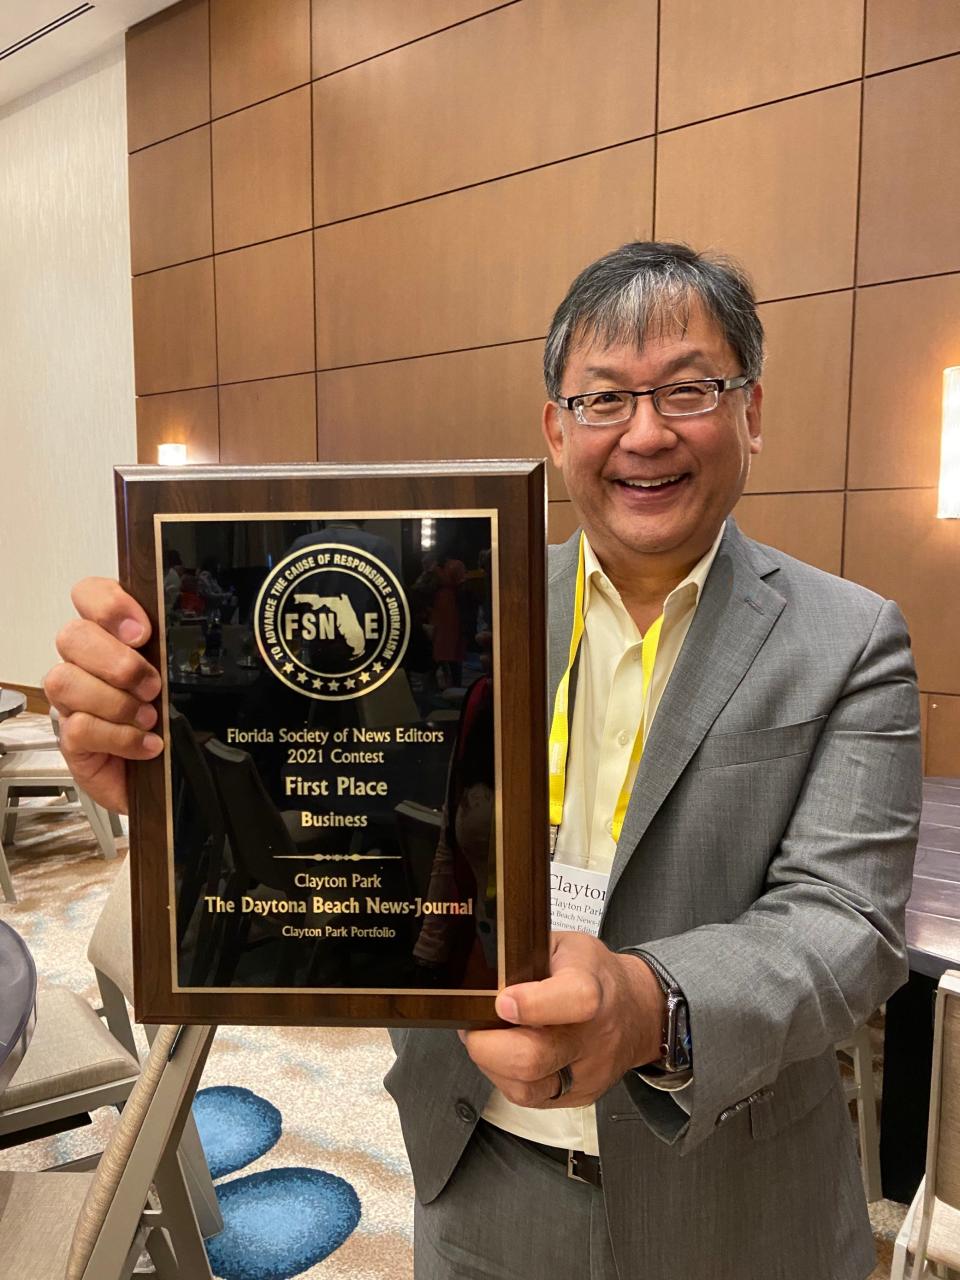 Clayton Park, business editor at Daytona Beach News-Journal, won first place in a Florida Society of News Editors contest for business reporting in 2021. Park attended the FSNE awards ceremony in Sarasota in July 2021.